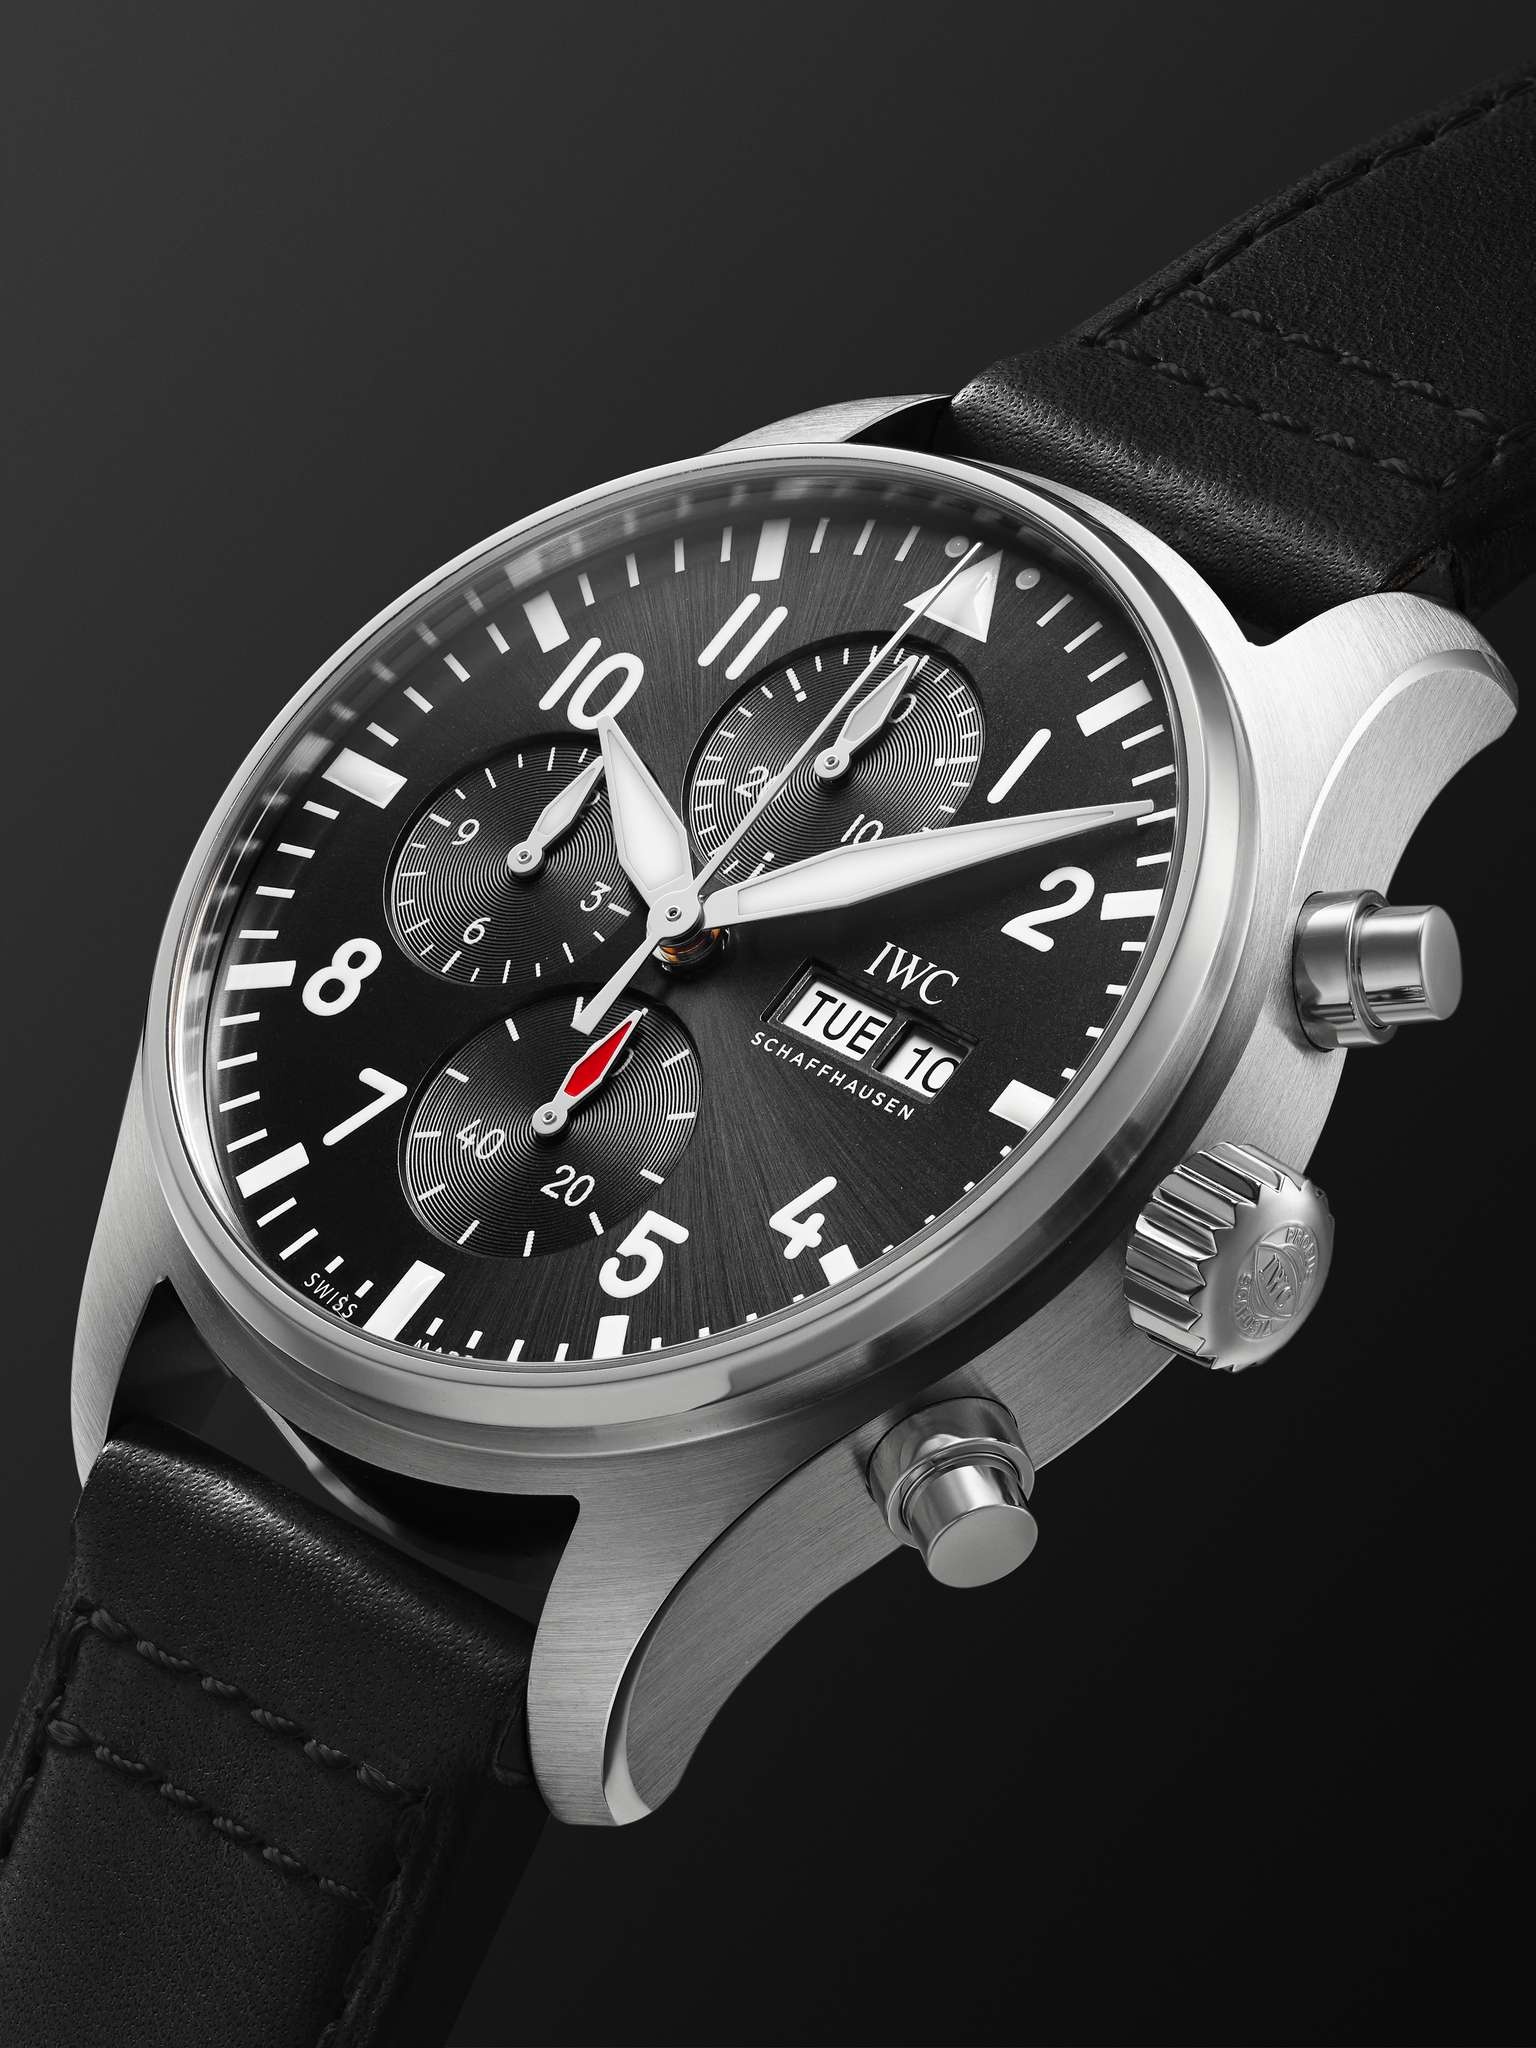 Pilot's Automatic Chronograph 43mm Stainless Steel and Leather Watch, Ref. No. IWIW378001 - 4